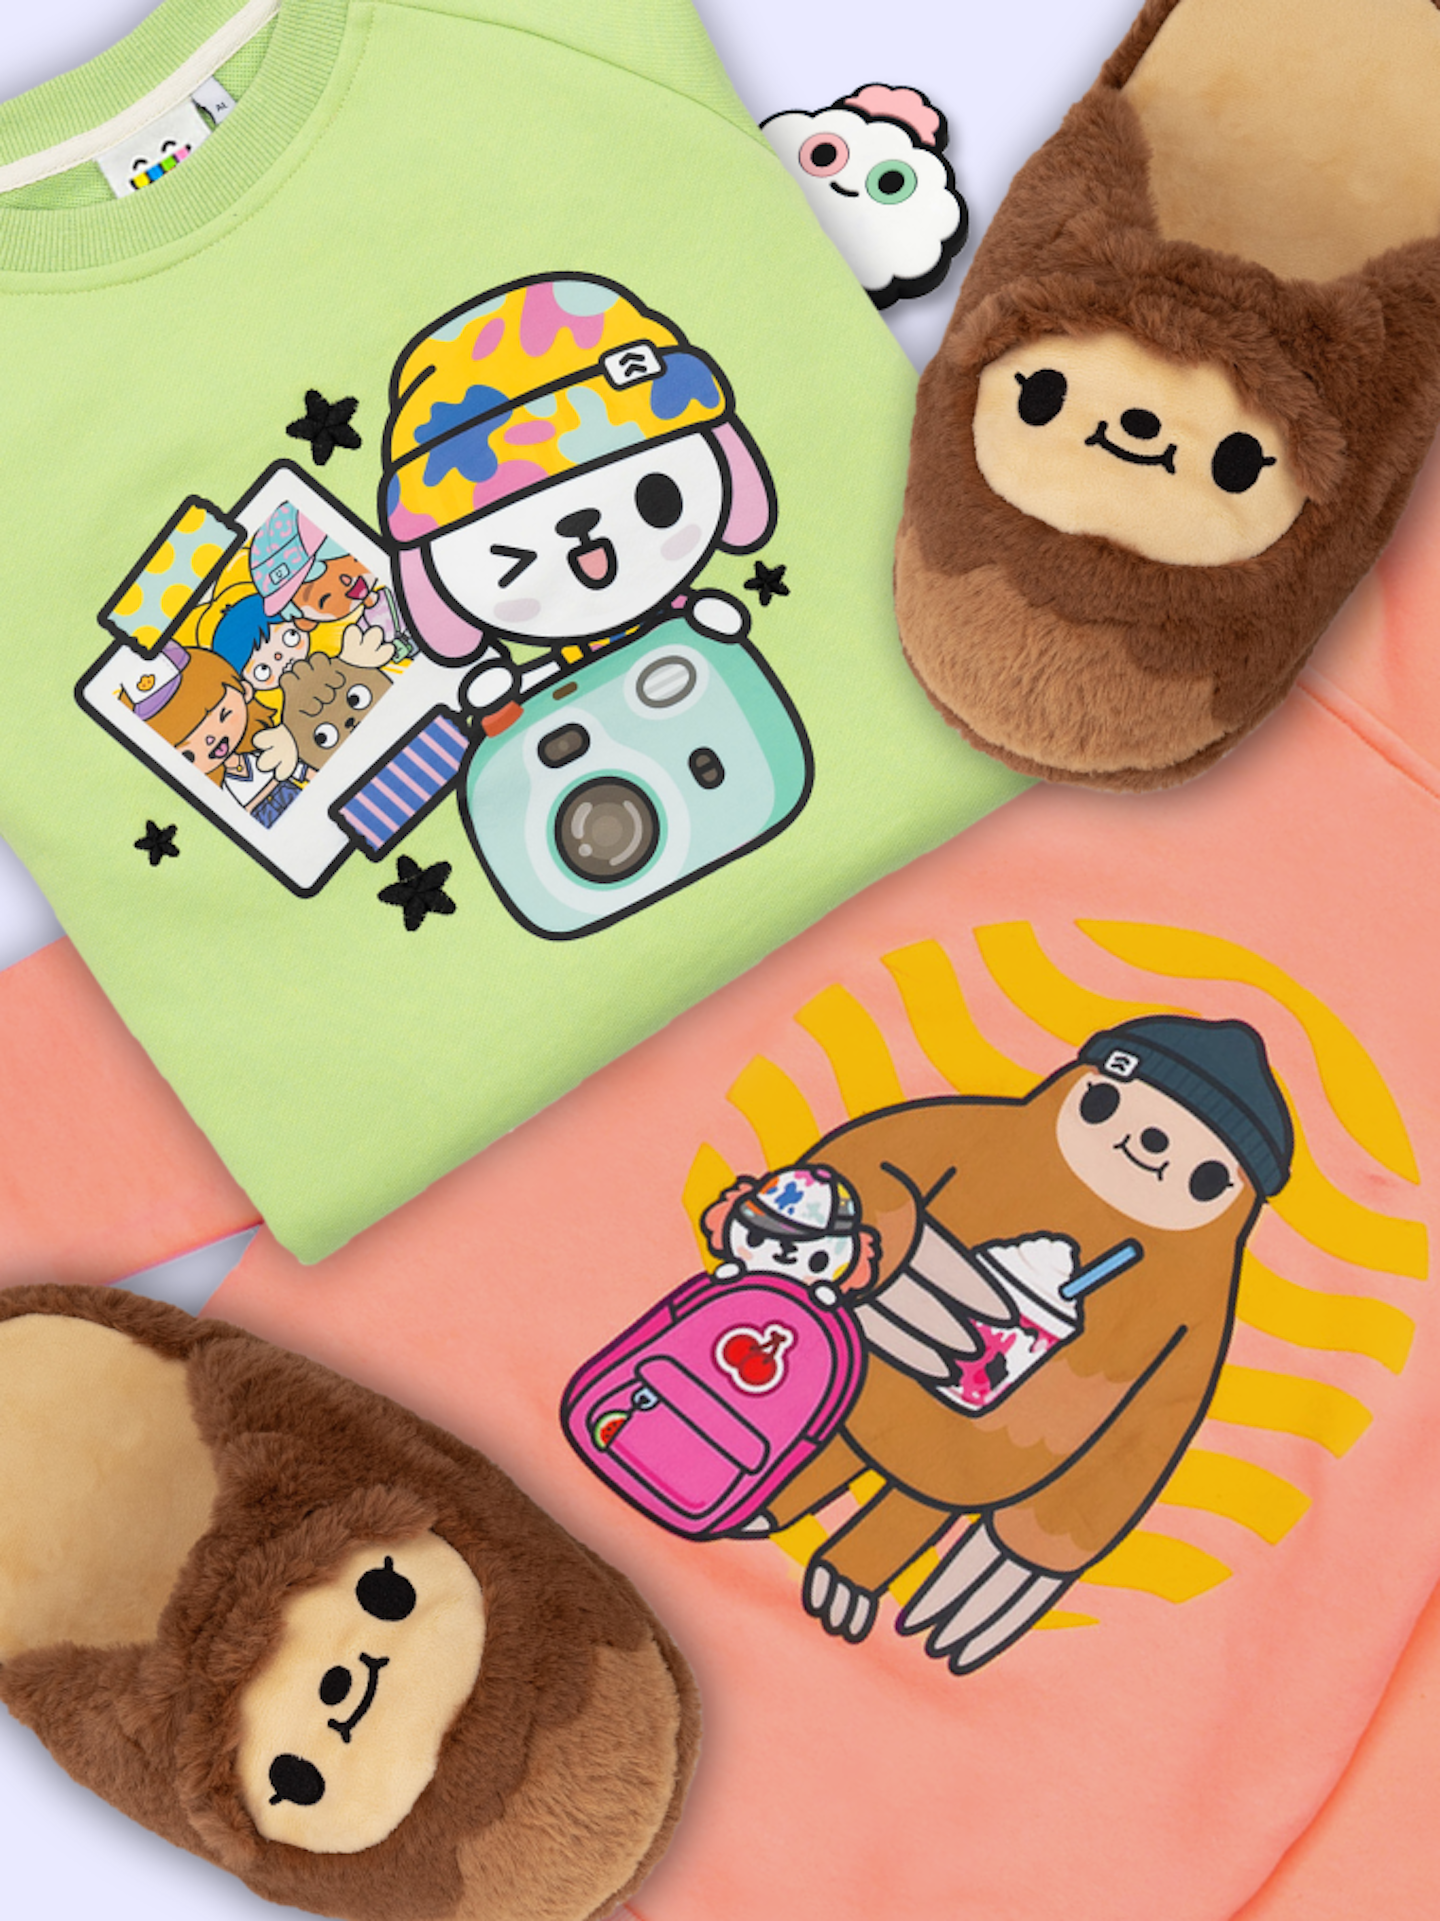 This is an image highlighting some of the real life Toca Boca merch that is available. There is a folded green sweater in the top left with a winking crumpet and other characters behind it in a polaroid and another orangey peach item of clothing in the bottom right with a sloth holding a shake and another crumpet poking out of a backpack. There are also slot slippers in the top right of the image and a white item of clothing with Croquet peeking out in the top middle of the image.